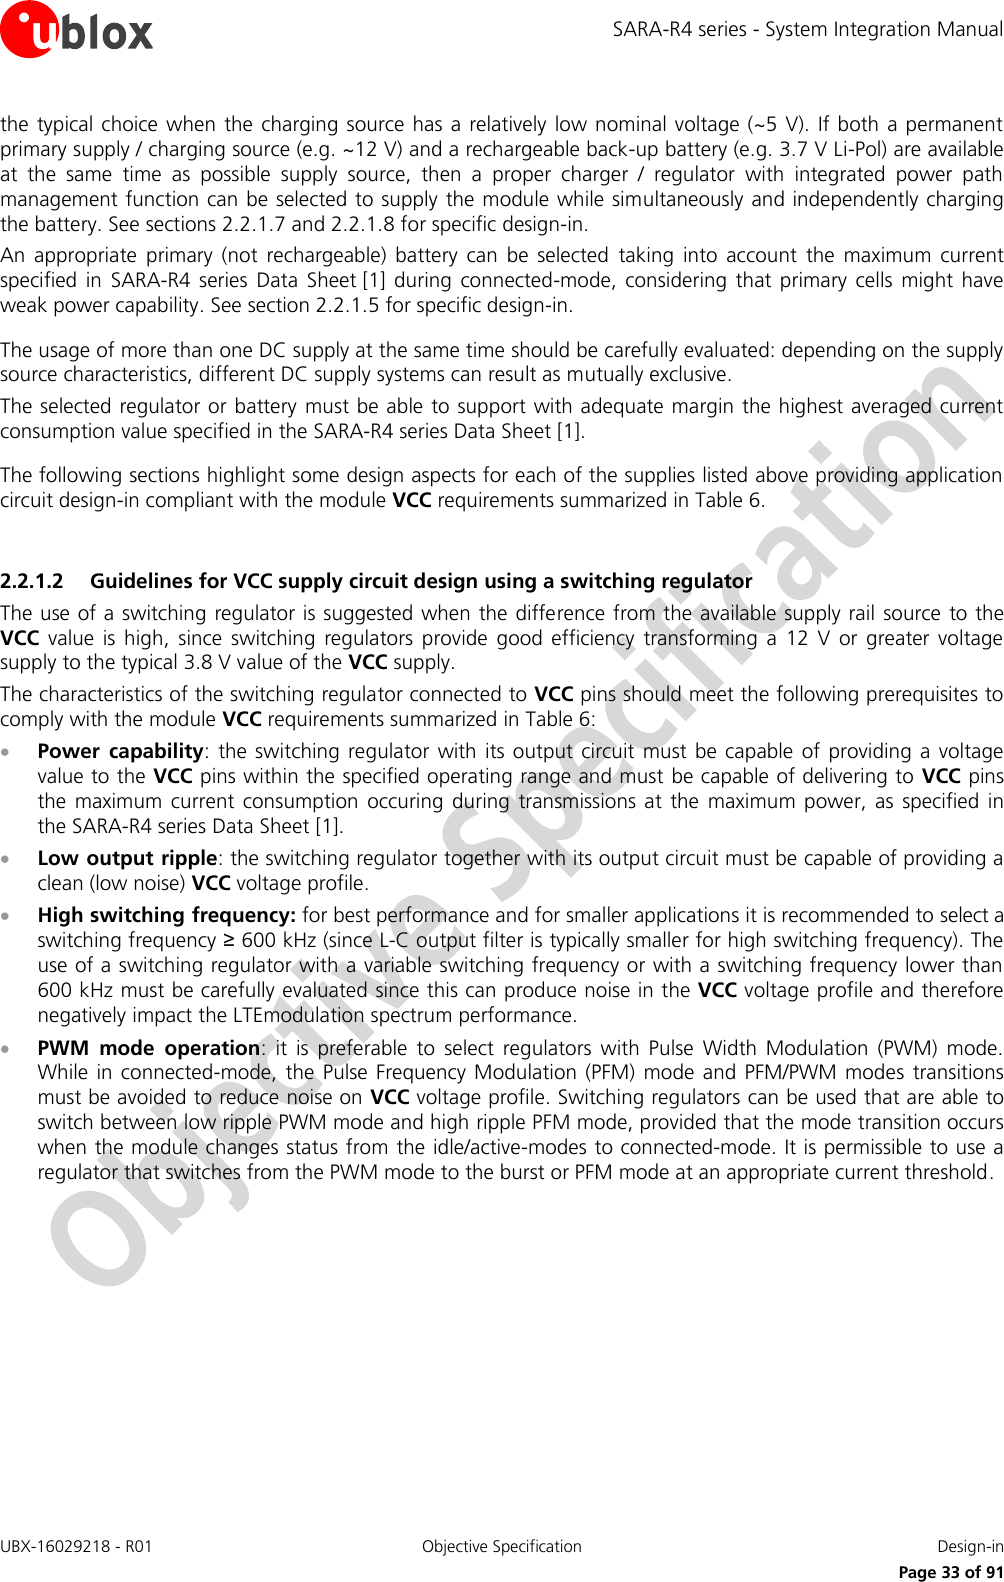 SARA-R4 series - System Integration Manual UBX-16029218 - R01  Objective Specification  Design-in     Page 33 of 91 the typical choice  when the charging source has a relatively low nominal voltage (~5 V).  If  both  a permanent primary supply / charging source (e.g. ~12 V) and a rechargeable back-up battery (e.g. 3.7 V Li-Pol) are available at  the  same  time  as  possible  supply  source,  then  a  proper  charger  /  regulator  with  integrated  power  path management function can be selected to supply the module while simultaneously and independently charging the battery. See sections 2.2.1.7 and 2.2.1.8 for specific design-in. An  appropriate  primary  (not  rechargeable)  battery  can  be  selected  taking  into  account  the  maximum  current specified  in  SARA-R4  series  Data  Sheet [1]  during  connected-mode,  considering  that  primary  cells  might  have weak power capability. See section 2.2.1.5 for specific design-in.  The usage of more than one DC supply at the same time should be carefully evaluated: depending on the supply source characteristics, different DC supply systems can result as mutually exclusive. The selected regulator or battery must be able to support with adequate margin the highest averaged current consumption value specified in the SARA-R4 series Data Sheet [1].   The following sections highlight some design aspects for each of the supplies listed above providing application circuit design-in compliant with the module VCC requirements summarized in Table 6.  2.2.1.2 Guidelines for VCC supply circuit design using a switching regulator The use of a switching regulator is suggested when the difference from the available supply rail source to the VCC  value  is  high,  since  switching  regulators  provide  good  efficiency  transforming  a  12  V  or greater  voltage supply to the typical 3.8 V value of the VCC supply. The characteristics of the switching regulator connected to VCC pins should meet the following prerequisites to comply with the module VCC requirements summarized in Table 6:  Power  capability:  the switching  regulator  with its output  circuit must  be capable  of providing  a voltage value to the VCC pins within the specified operating range and must be capable of delivering to VCC pins the  maximum  current  consumption  occuring  during  transmissions  at  the  maximum  power,  as specified  in the SARA-R4 series Data Sheet [1].  Low output ripple: the switching regulator together with its output circuit must be capable of providing a clean (low noise) VCC voltage profile.  High switching frequency: for best performance and for smaller applications it is recommended to select a switching frequency ≥ 600 kHz (since L-C output filter is typically smaller for high switching frequency). The use of a switching regulator with a variable switching frequency or with a switching frequency lower than 600 kHz must be carefully evaluated since this can produce noise in the VCC voltage profile and therefore negatively impact the LTEmodulation spectrum performance.  PWM  mode  operation:  it  is  preferable  to  select  regulators  with  Pulse  Width  Modulation  (PWM)  mode. While in  connected-mode,  the  Pulse  Frequency Modulation  (PFM)  mode and  PFM/PWM  modes  transitions must be avoided to reduce noise on VCC voltage profile. Switching regulators can be used that are able to switch between low ripple PWM mode and high ripple PFM mode, provided that the mode transition occurs when the module changes status from  the idle/active-modes to connected-mode. It is permissible to use a regulator that switches from the PWM mode to the burst or PFM mode at an appropriate current threshold. 